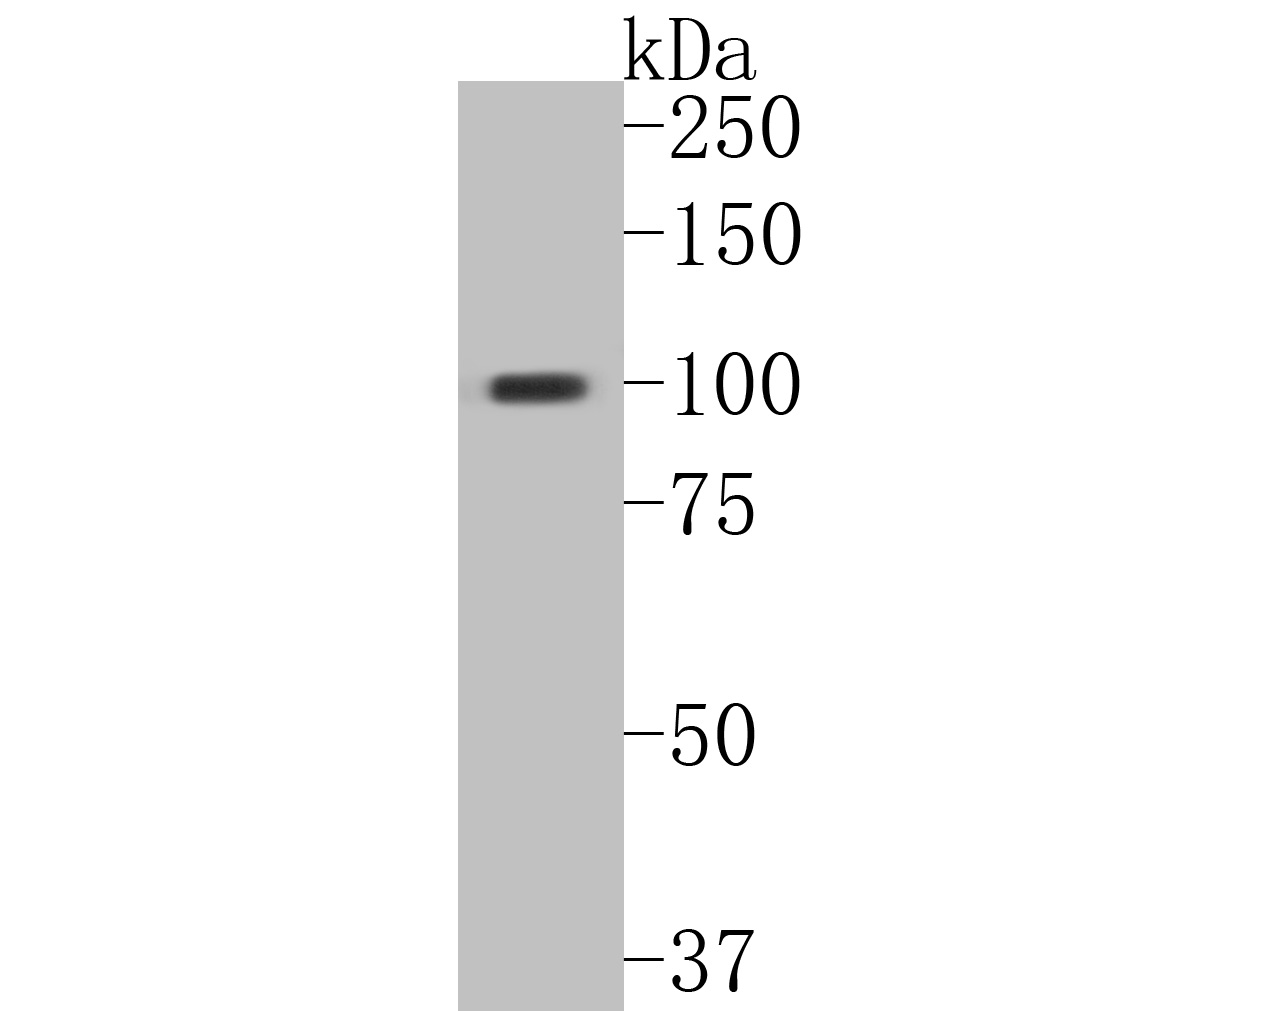 Western blot analysis of DNA2 on human stomach tissue lysates. Proteins were transferred to a PVDF membrane and blocked with 5% BSA in PBS for 1 hour at room temperature. The primary antibody (ER2001-20, 1/500) was used in 5% BSA at room temperature for 2 hours. Goat Anti-Rabbit IgG - HRP Secondary Antibody (HA1001) at 1:5,000 dilution was used for 1 hour at room temperature.